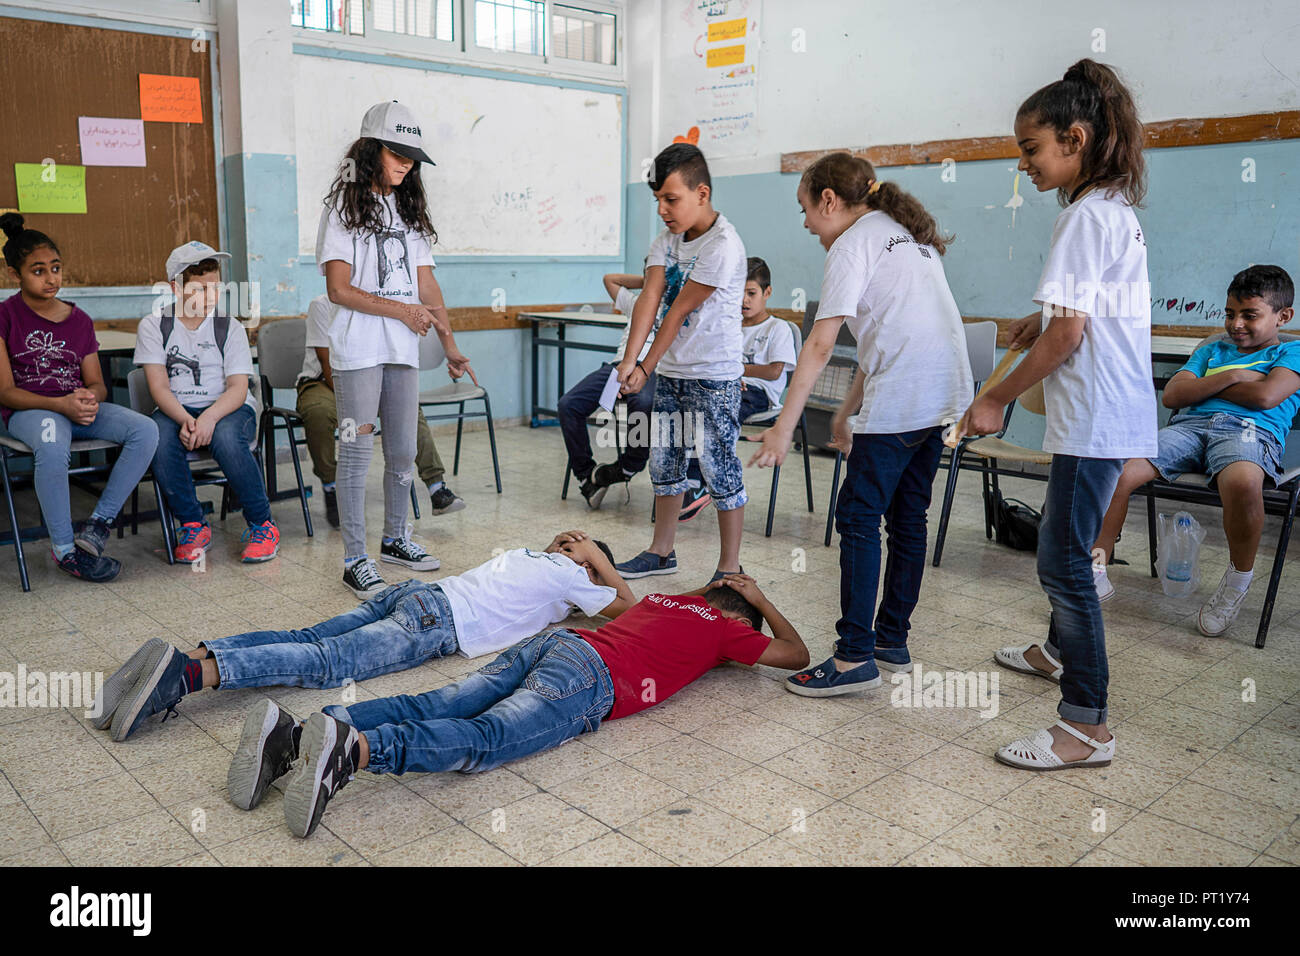 Bethlehem, Palestine. 13th Feb, 2018. Students are seen In a drama class re-acting a situation where Palestinian youths were arrested by the Israeli forces during the summer camp.The Return Summer Camp was organised for children of the Aida refugee camp, it was established in 1950 by the Palestinians who were expelled from their homes from 27 towns throughout Palestine, namely Nasra, Tabaria, Jerusalem, Acre, Jaffa, Haifa and Hebron. This is a 4th generation of refugees, 130 children ranging from 4 to 16 years of age being overlooked by 20 instructors and volunteers and it was funded by Stock Photo